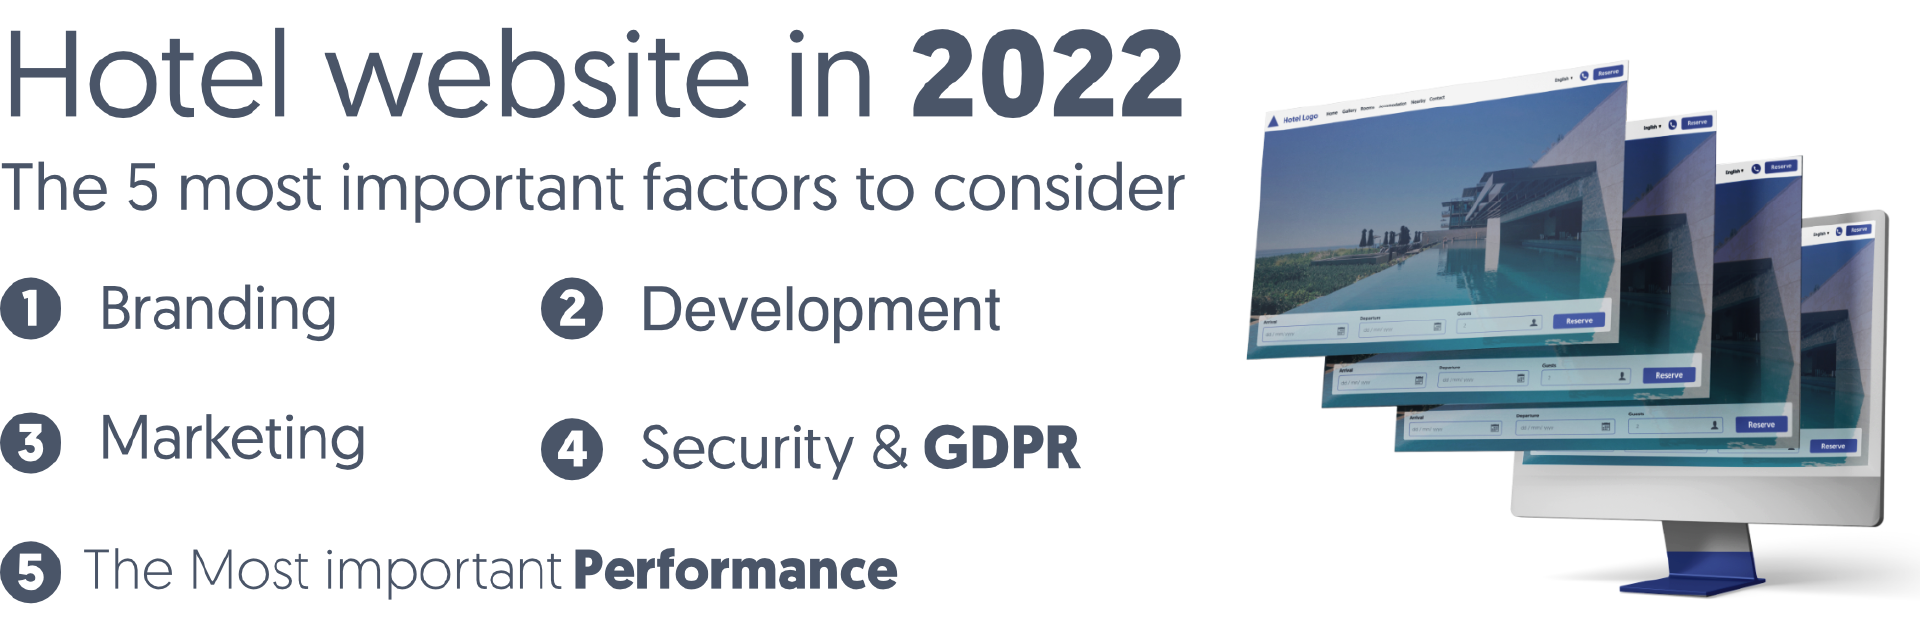 Illustrative SVG showing a text heading 'Hotel Website in 2022' with a subheading 'The 5 most important factors to consider', numbers from 1 to 5 in round circles labeled 'Branding', 'Development', 'Marketing', 'Security & GDPR', 'Performance'. The image also depicts an iMac illustration showing a custom-built hotel theme which has 4 layers on top of each other to create the illusion of a webpage coming out of the iMac. The custom hotel theme shows a logo, menu, language switcher, phone icon, reservation button, an image of a hotel with a pool and view of greenery and sea. On the bottom of the screen, there is a booking reservation form with form fields arrival, departure, and number of guests and a blue button 'Reserve.' In general, this illustration explains the 5 most important factors that hoteliers or hotels need to consider for their hotel website.